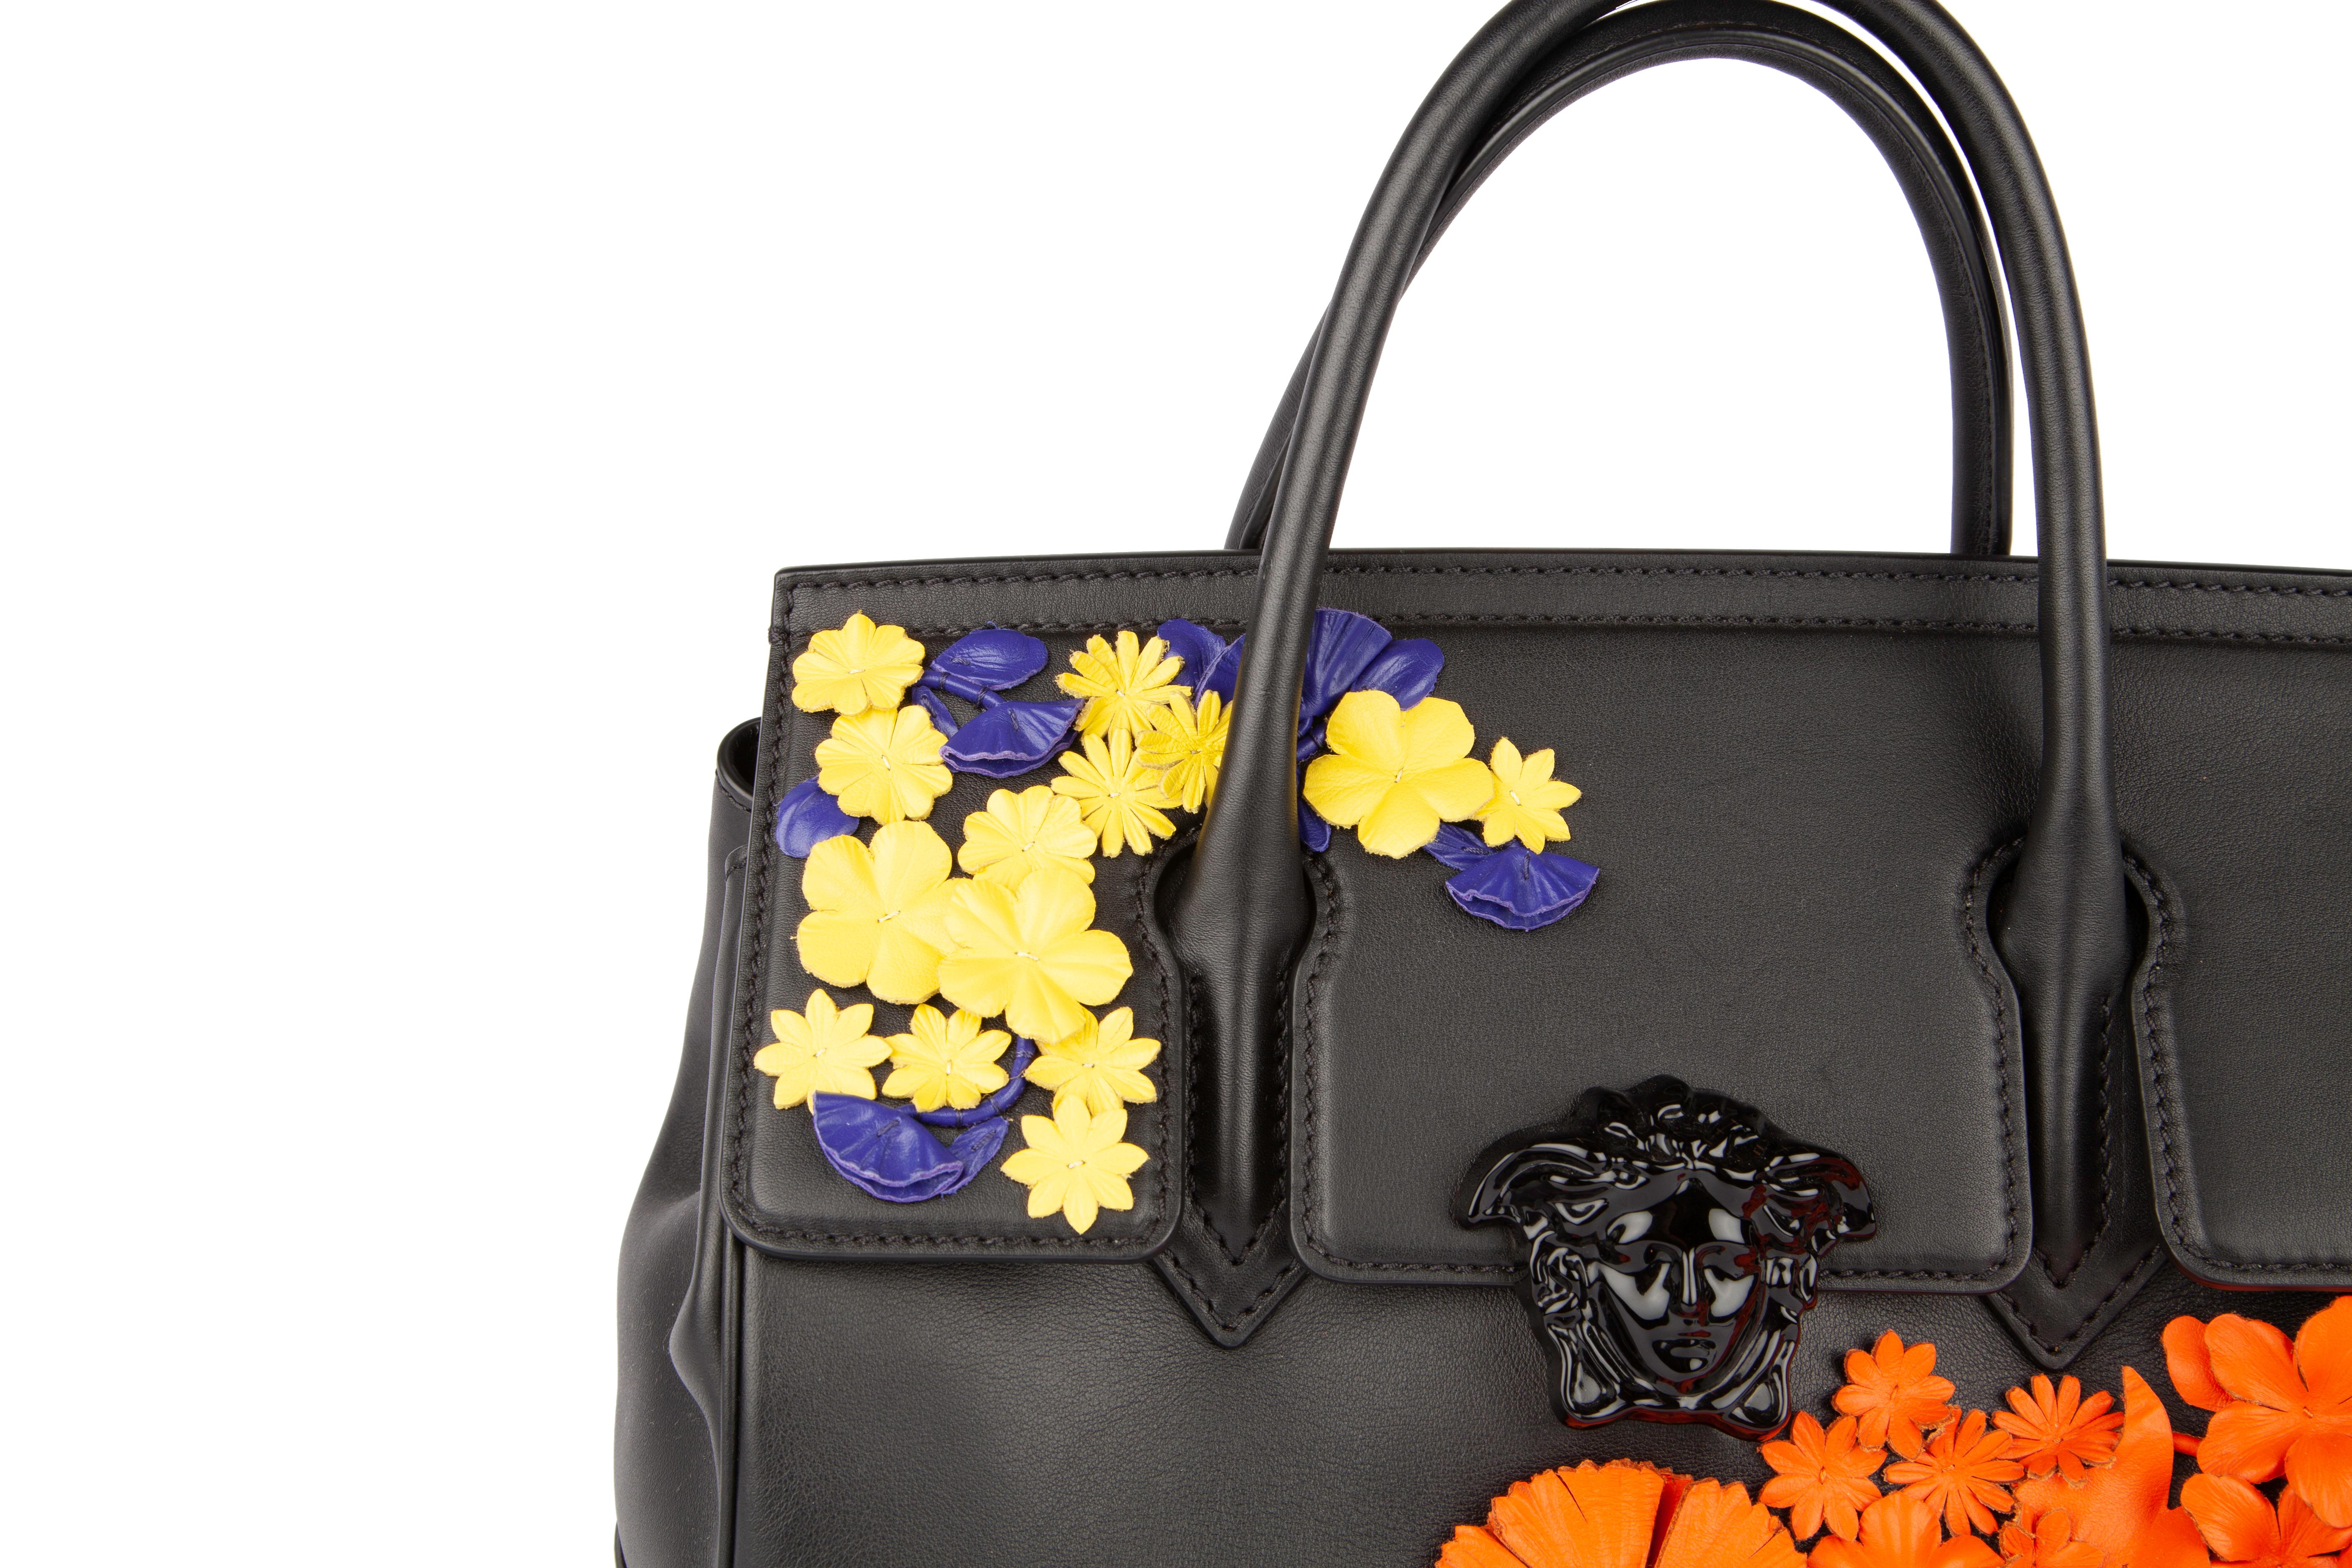 This Versace multi-color leather Palazzo Empire bag features a beautifully hand-sewn flower appliqués, a magnetic snap fastening, and the iconic Versace medusa head front and center. This item is brand new and never owned, however it was the store